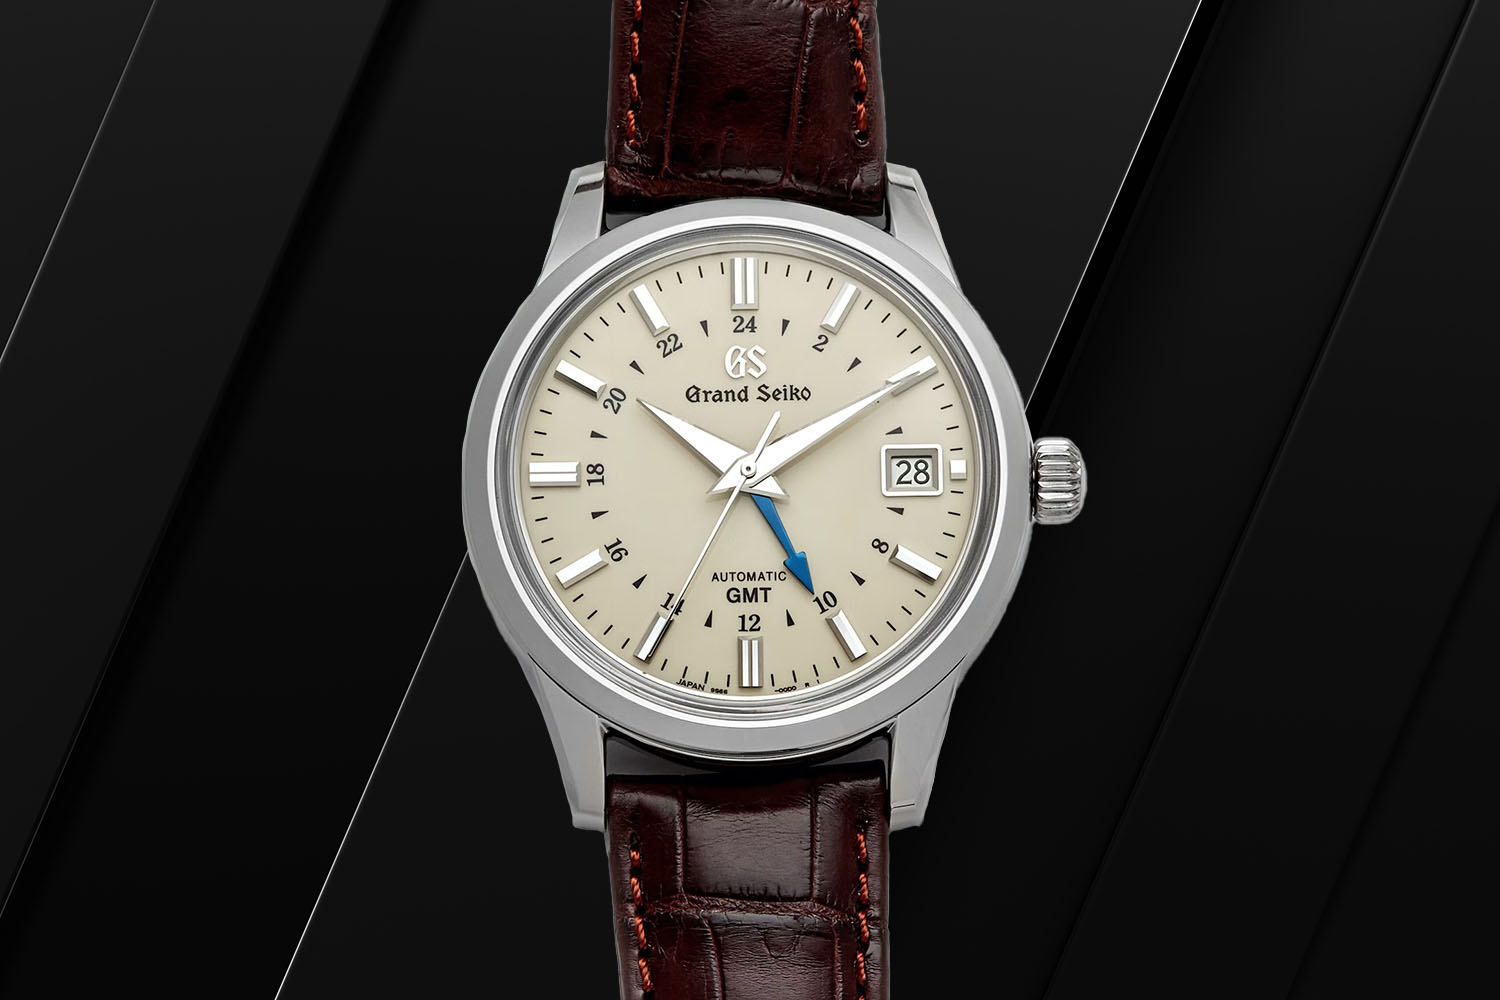 The Grand Seiko Automatic GMT is one of the best GMT watchess